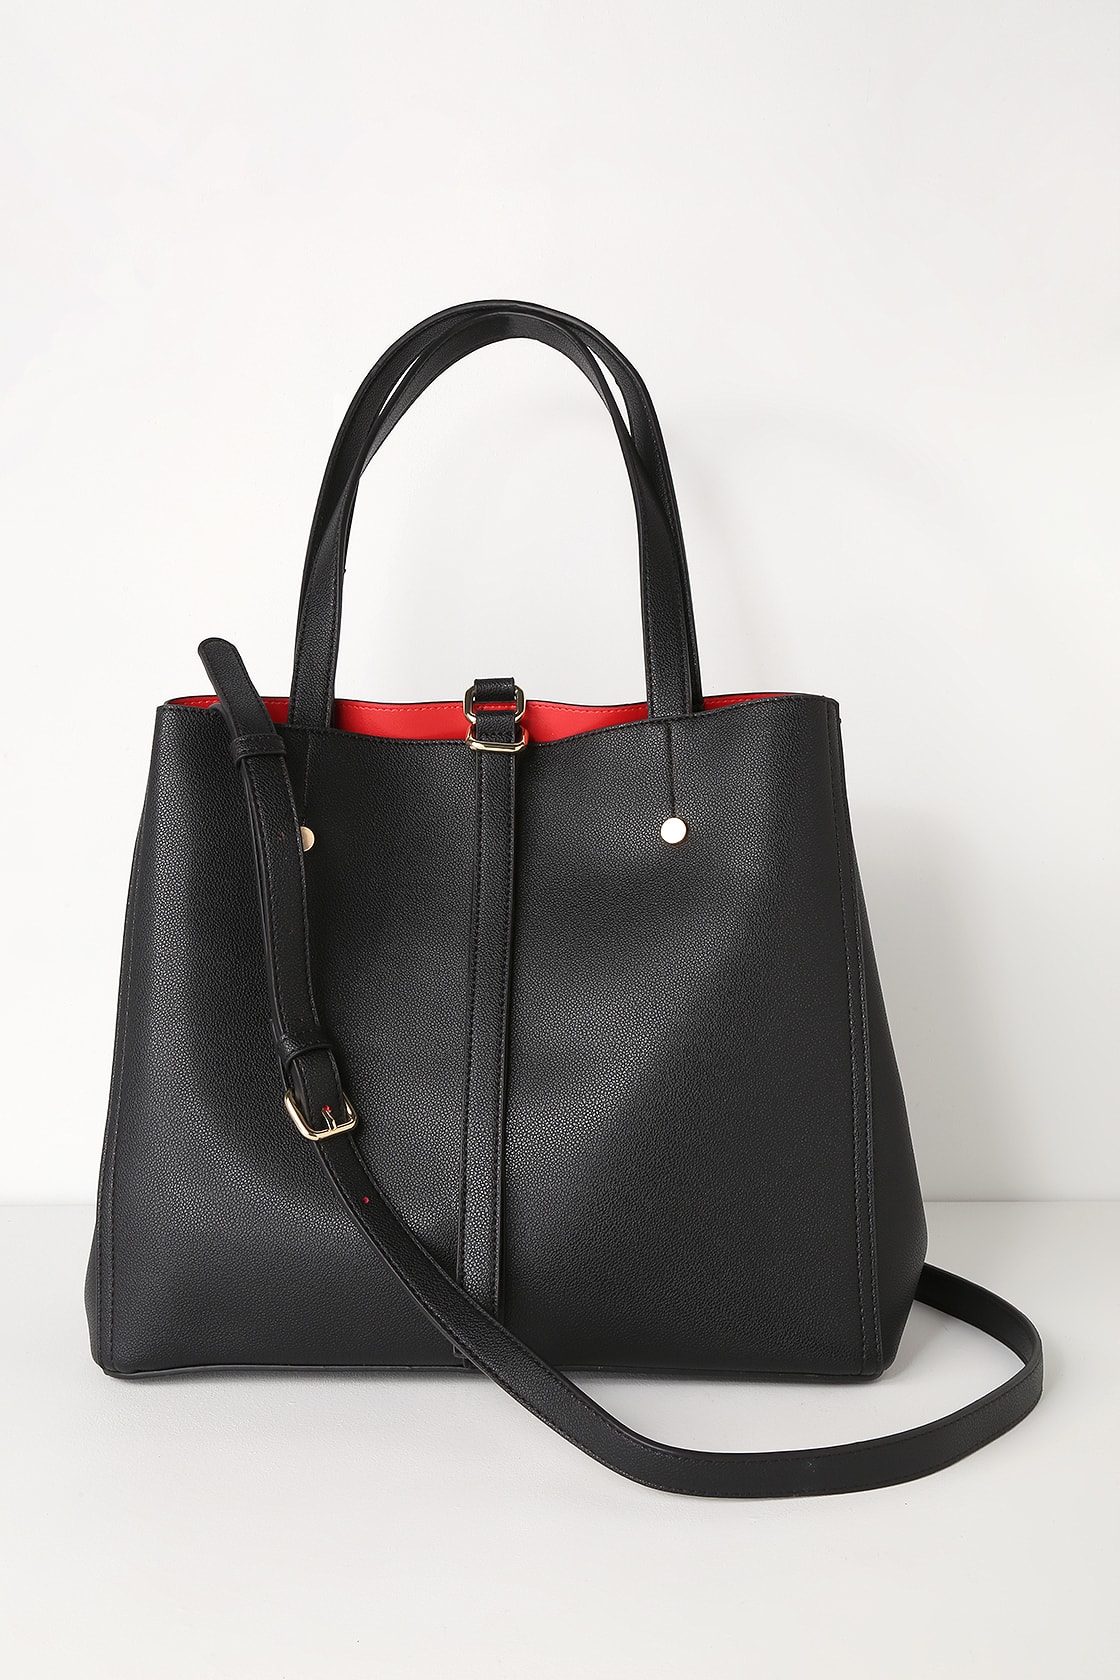 Back to Business Black Tote